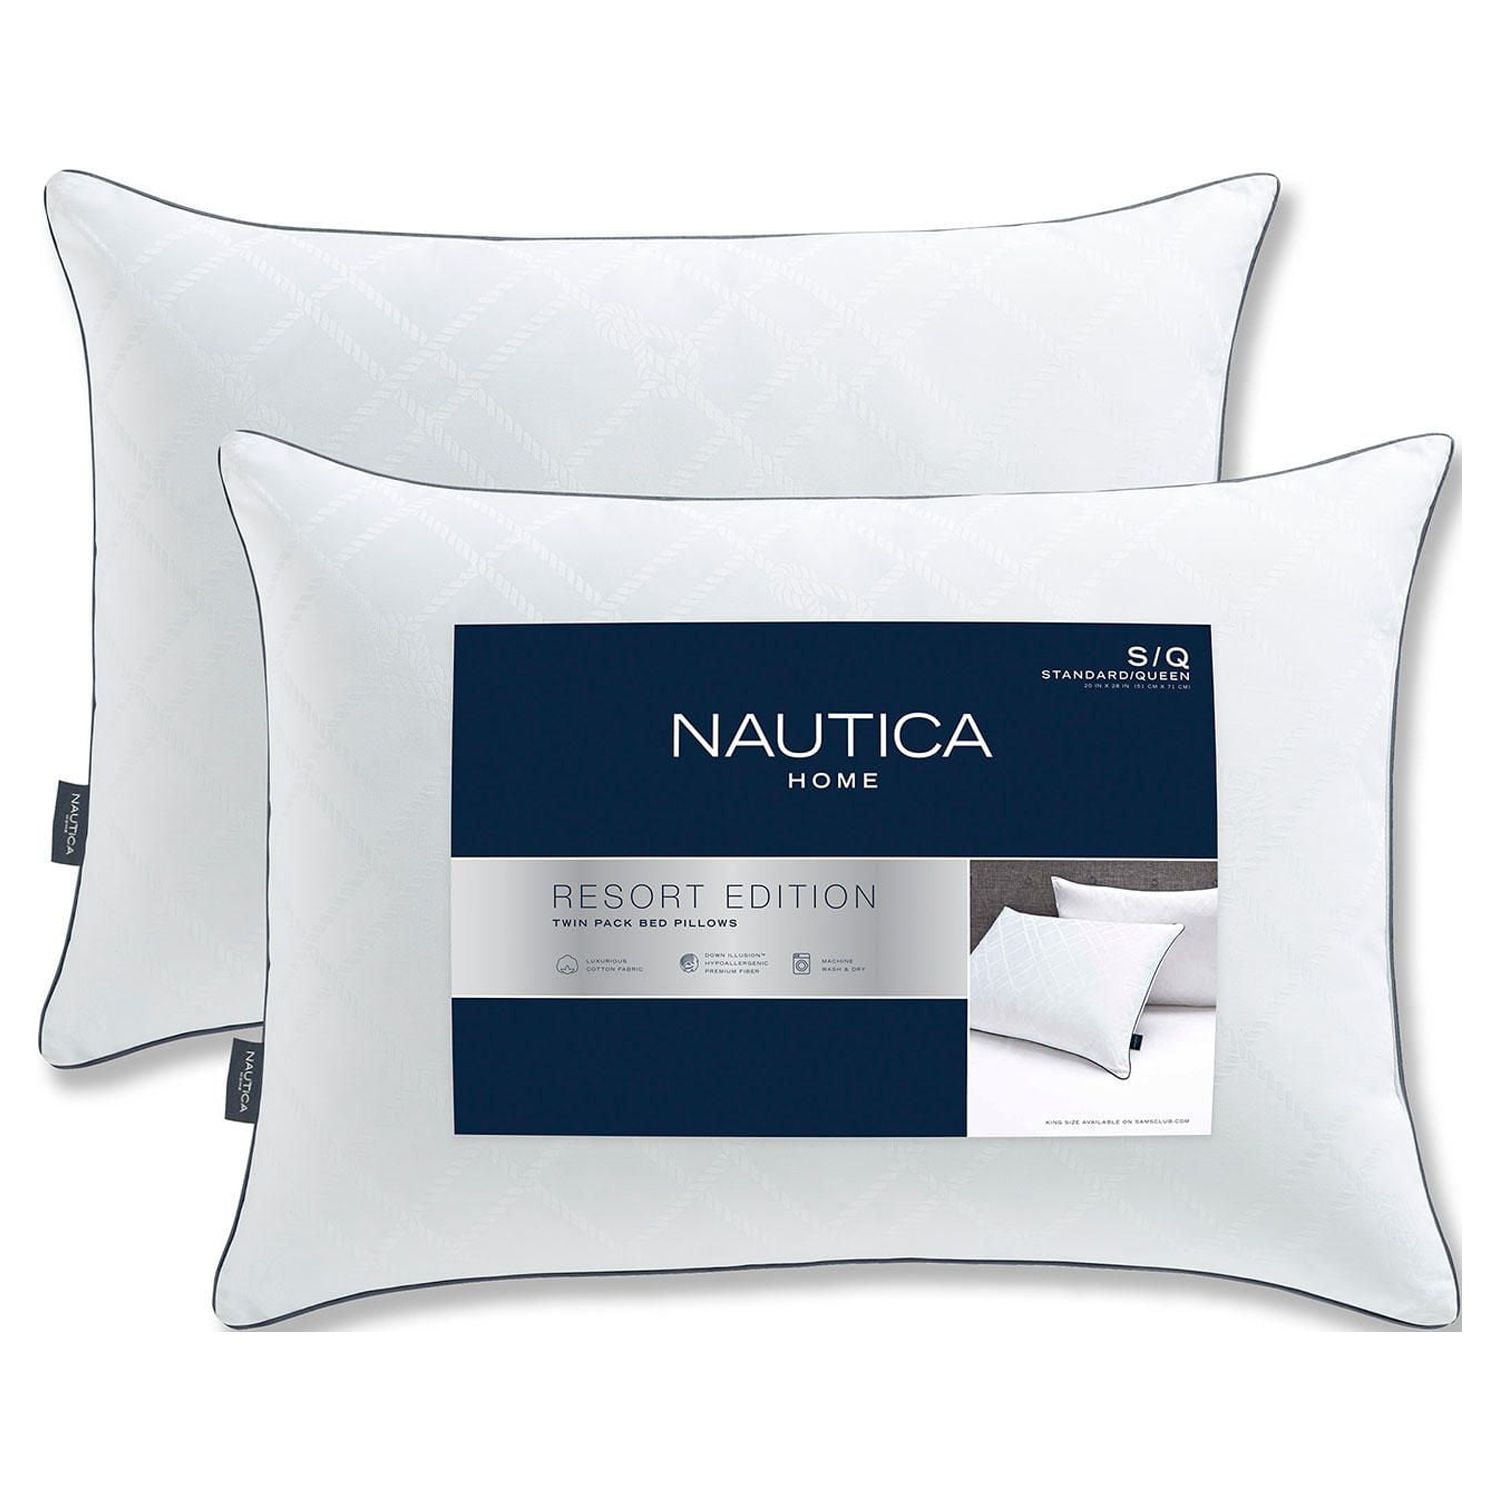 NAUTICA Home Resort Edition Bed Pillow, 2 Pack (Standard/Queen Size) 